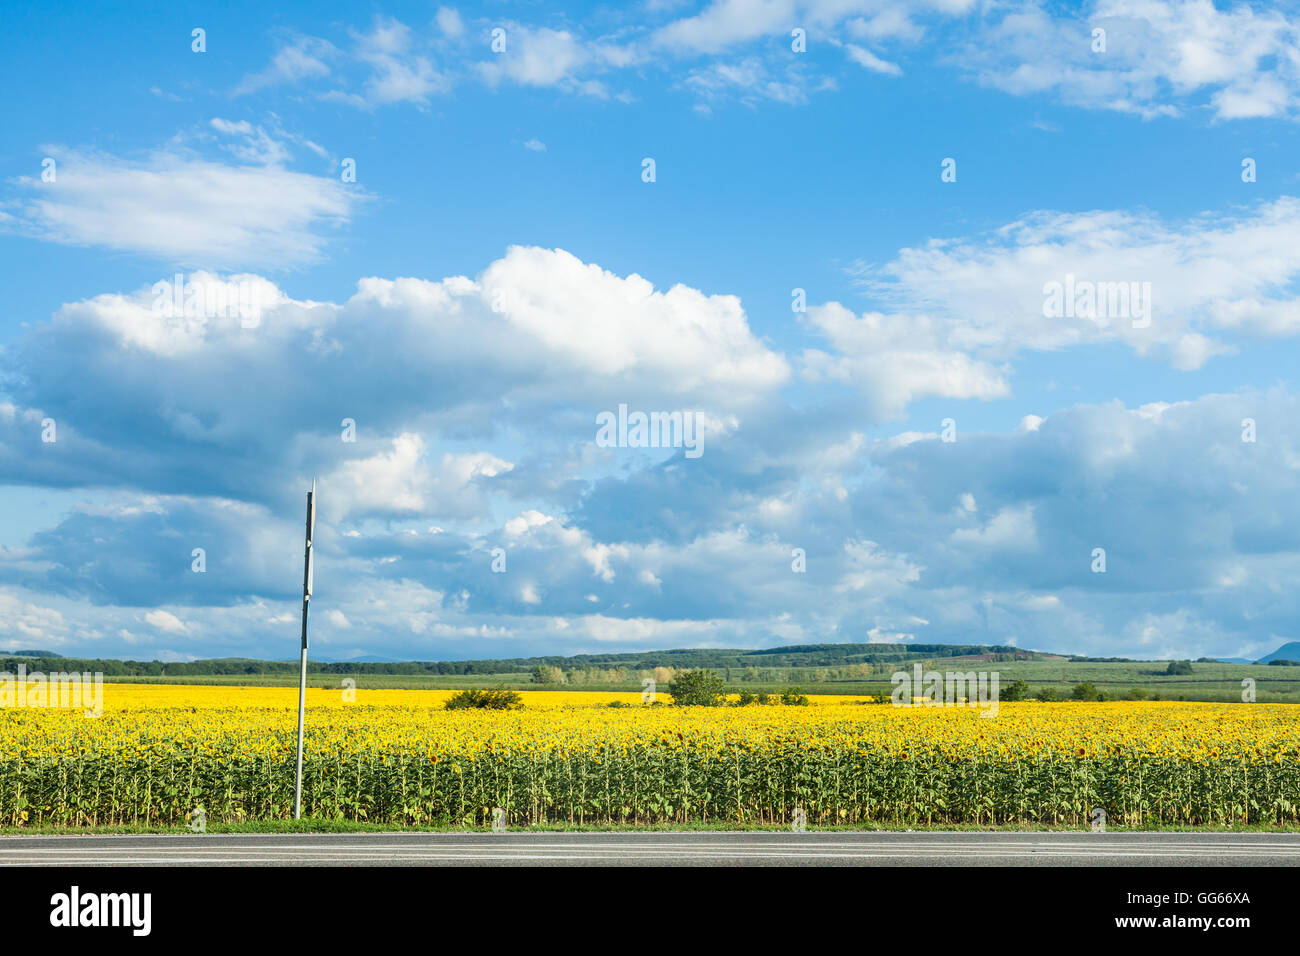 blue sky with white clouds over yellow sunflower field in sunny summer day, Kuban, Russia Stock Photo